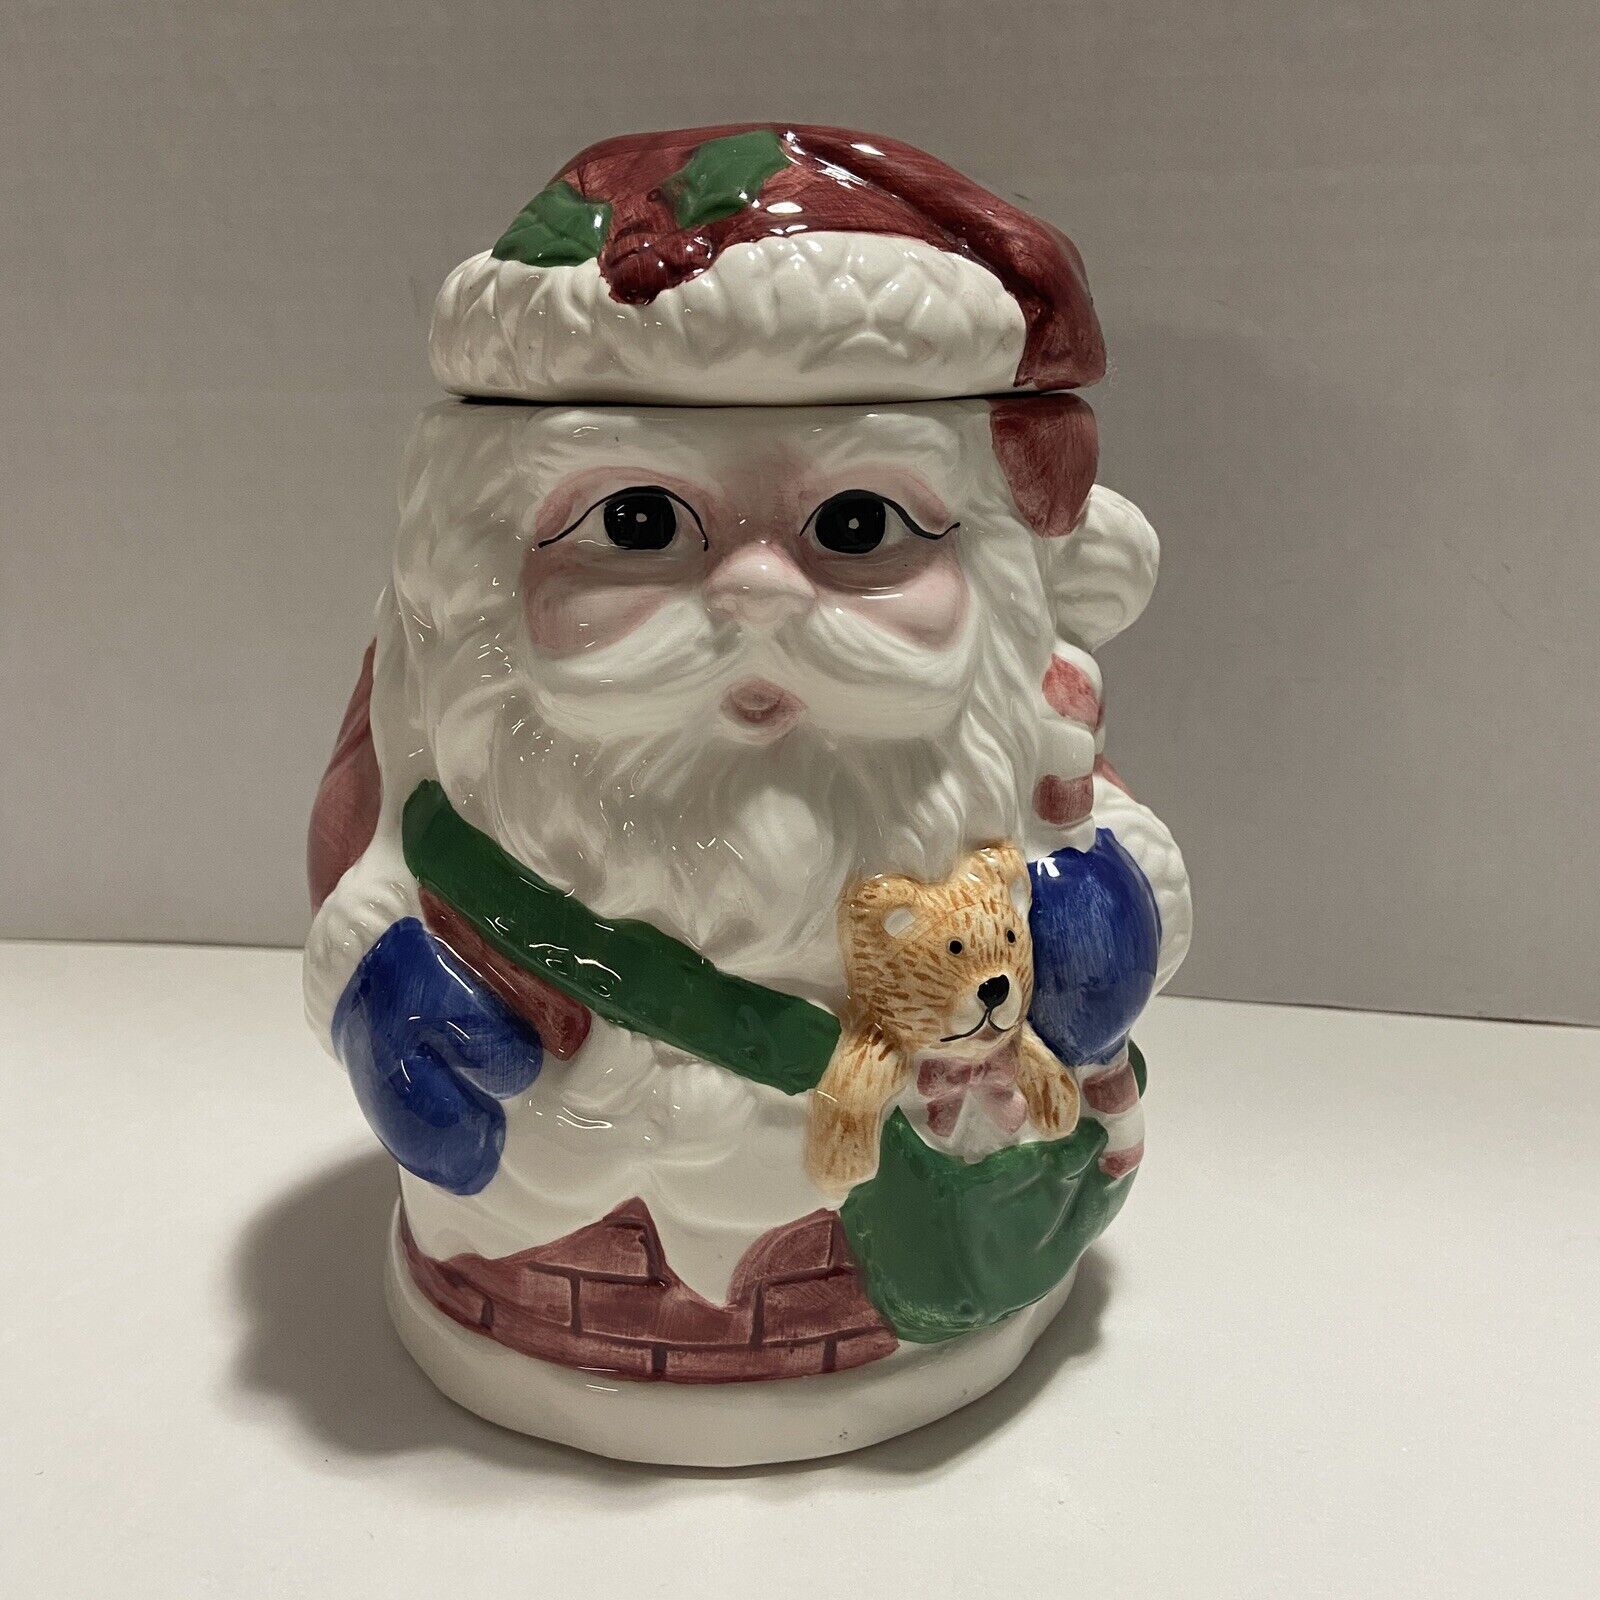 Santa Claus Ceramic Christmas Cookie Jar with Bag of Toys 7” Tall